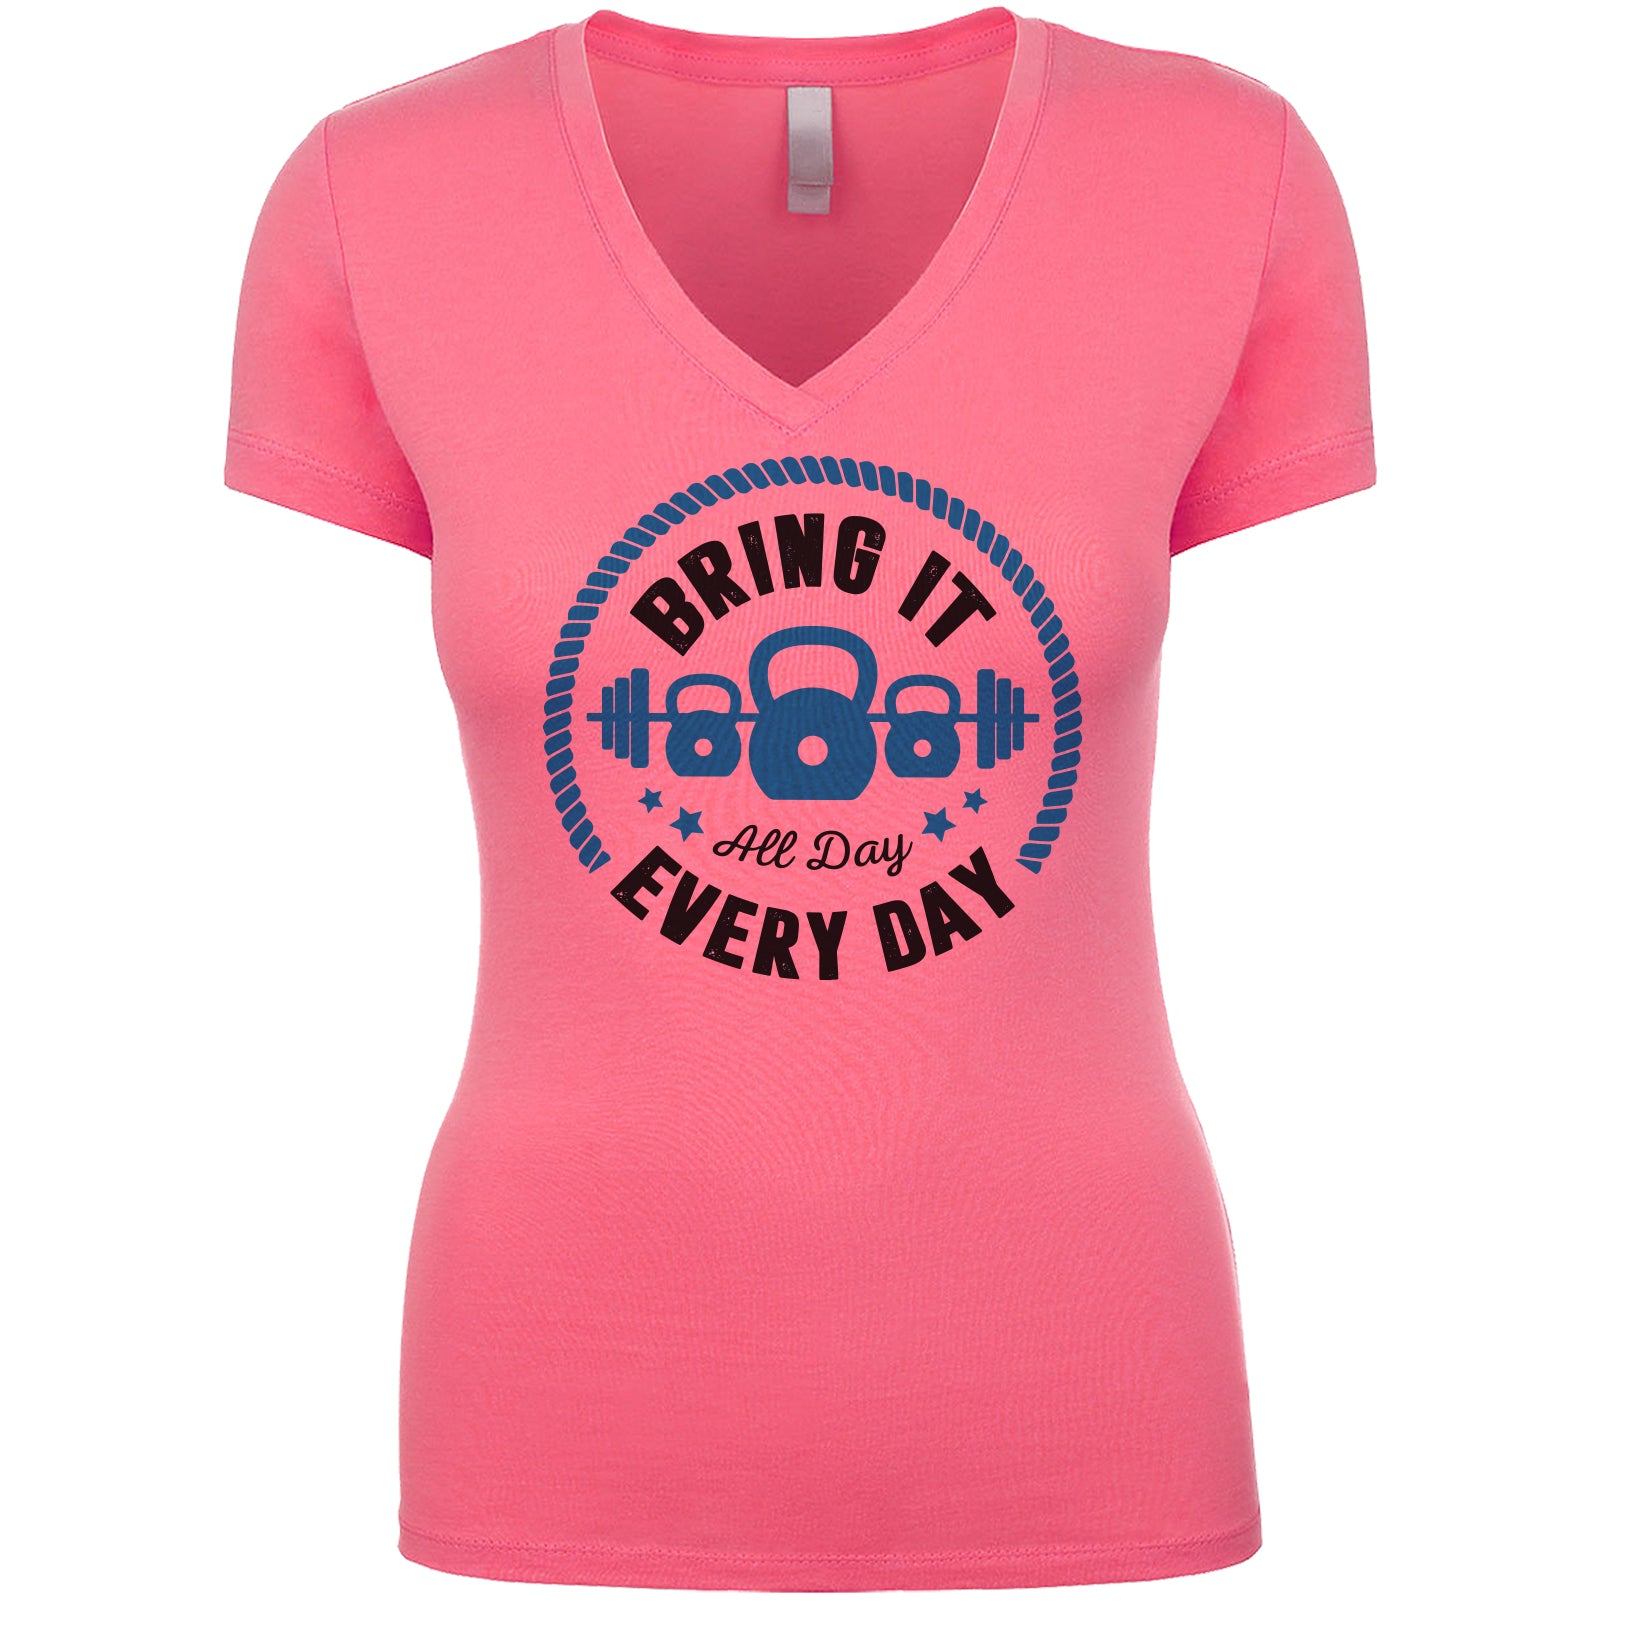 Bring It All Day, Every day Women's V Neck